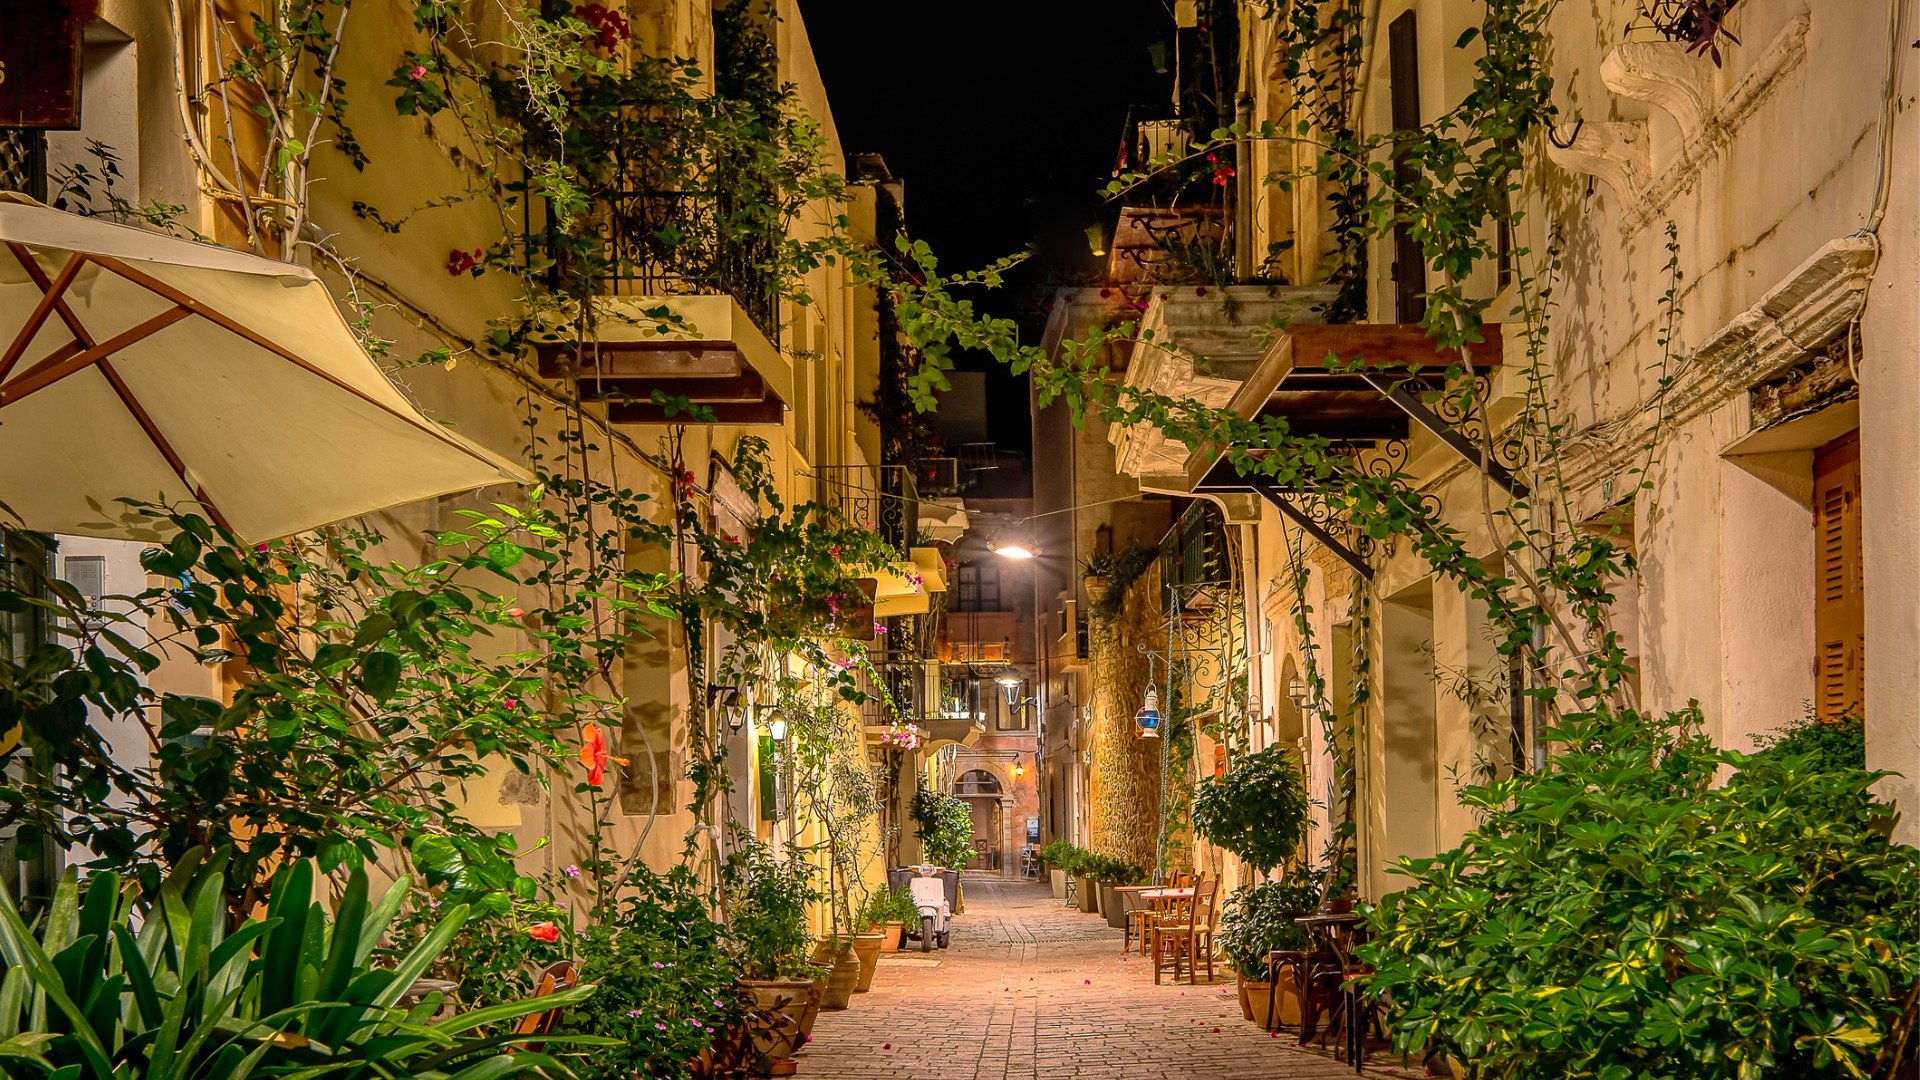 This image shows a dimly lit alley in Chania Old Town. 